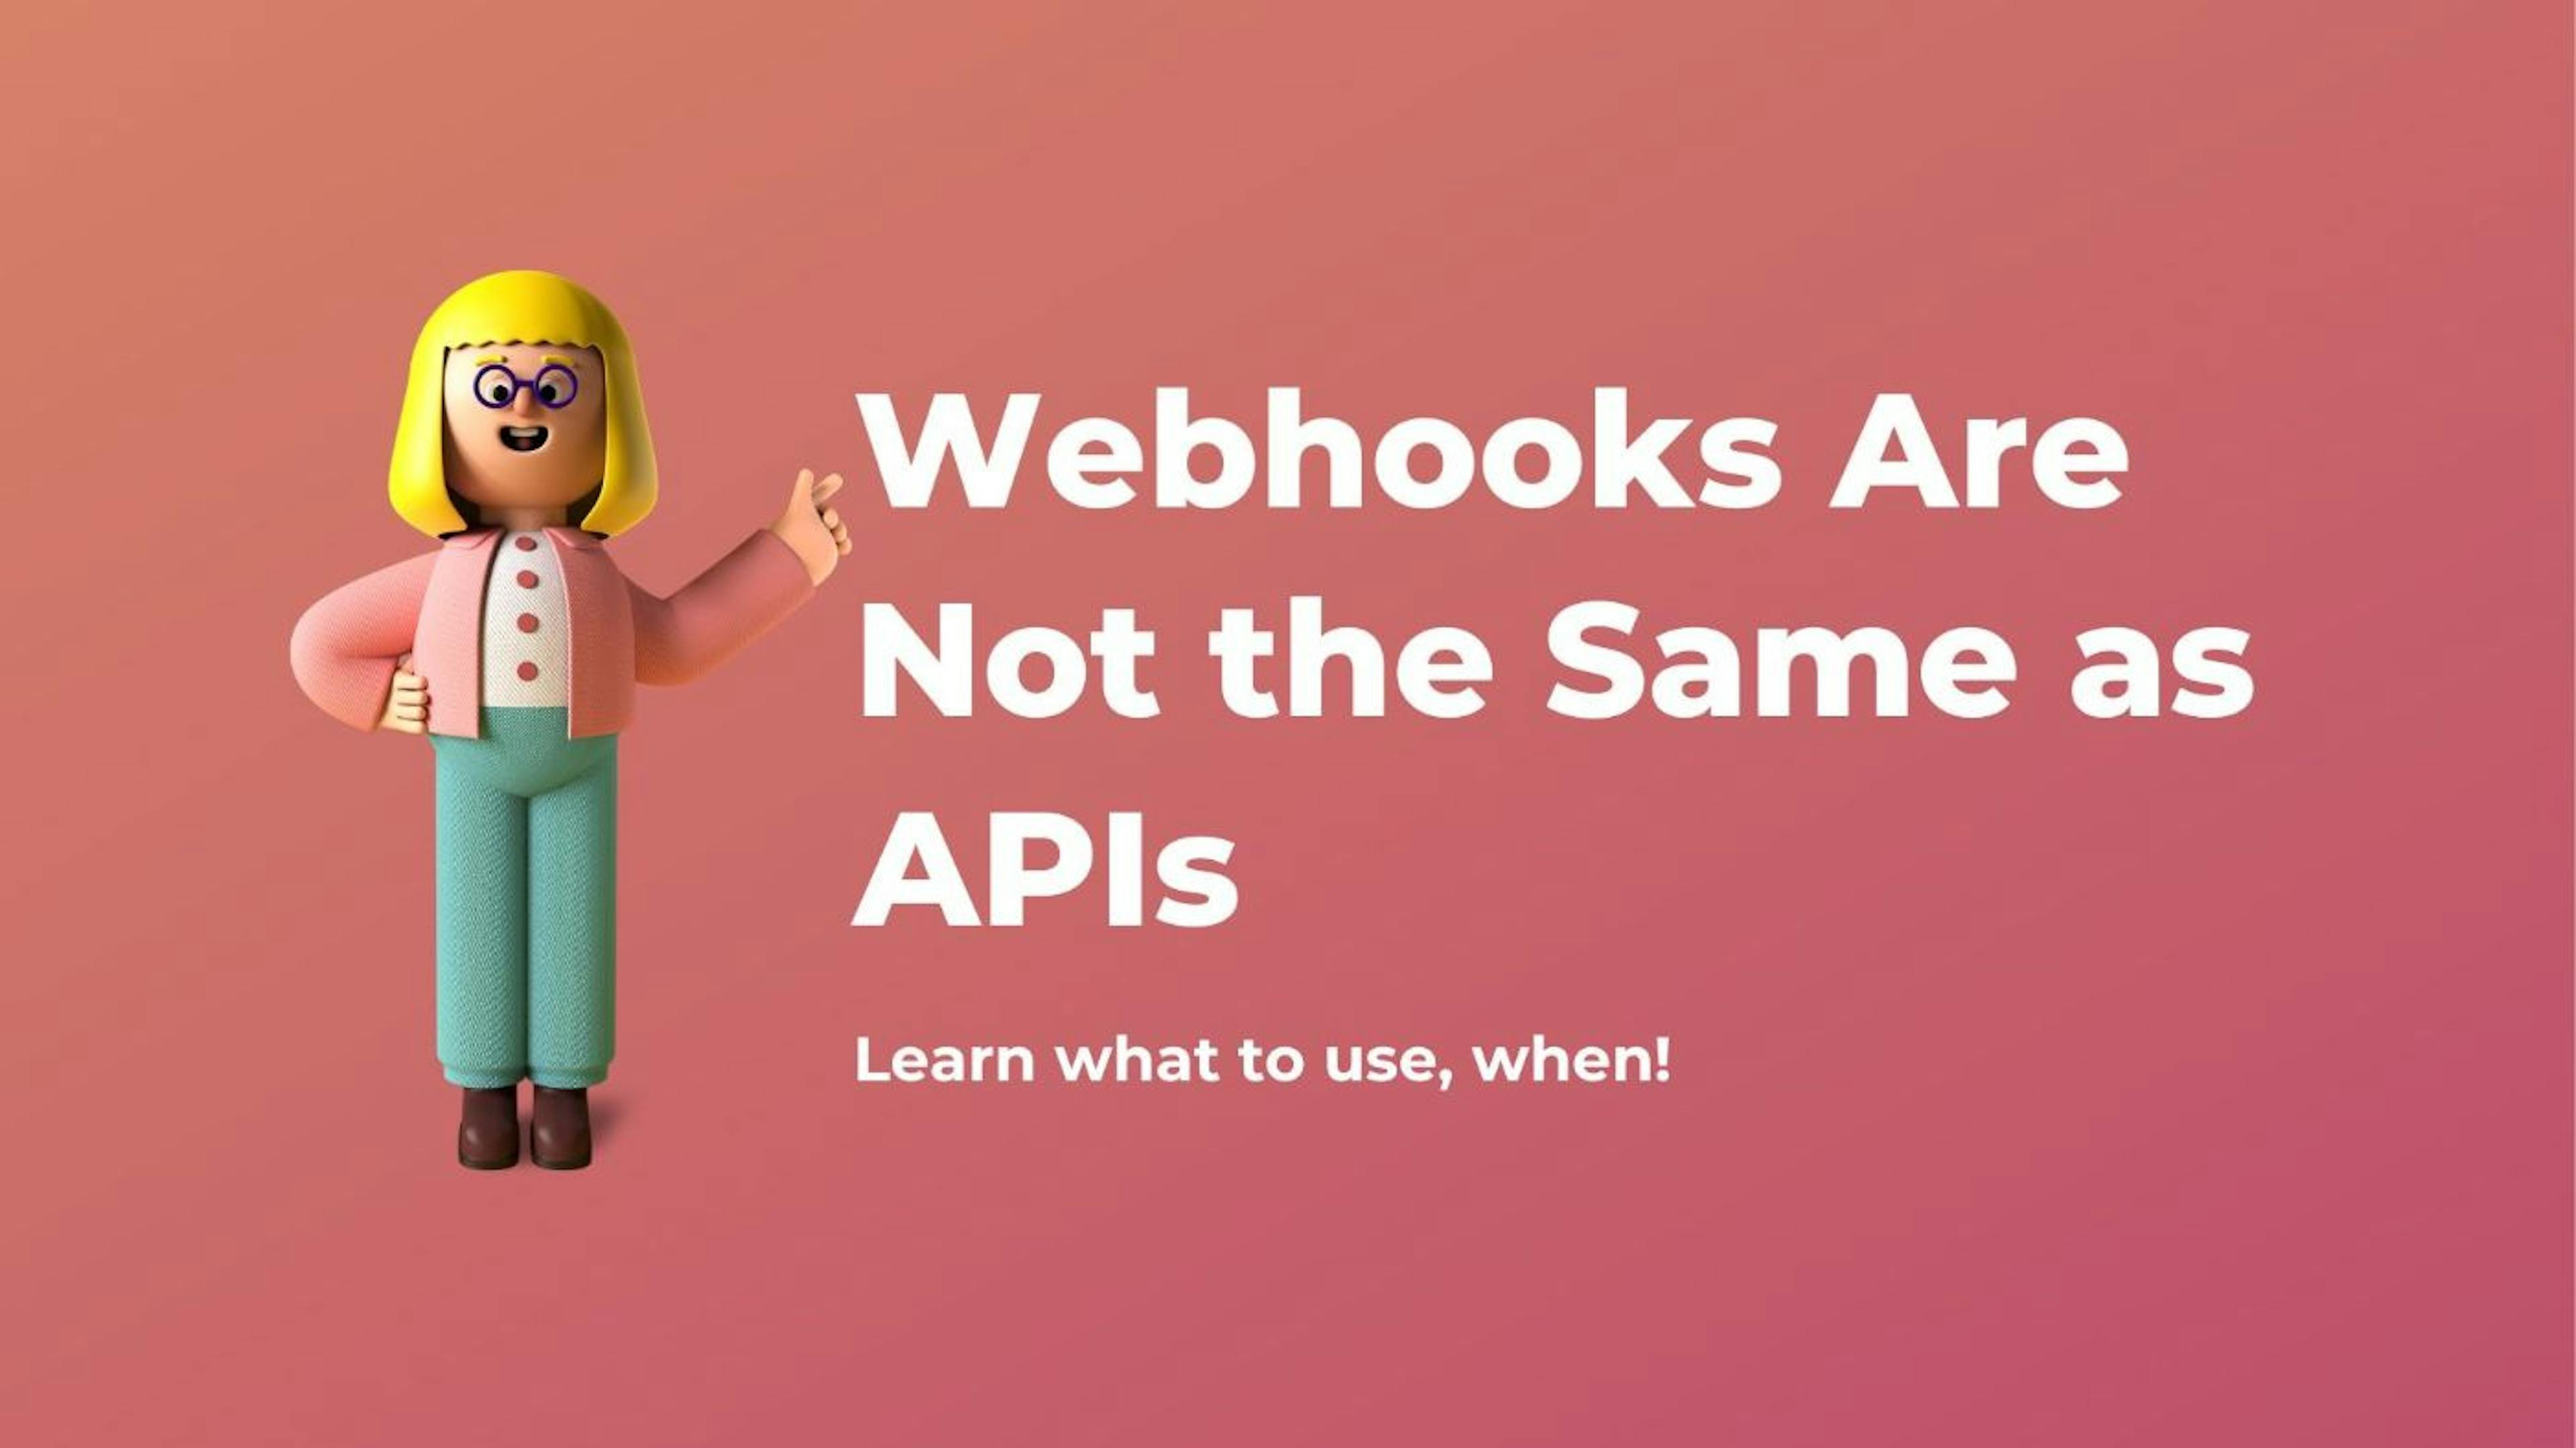 /webhooks-are-not-the-same-as-apis feature image